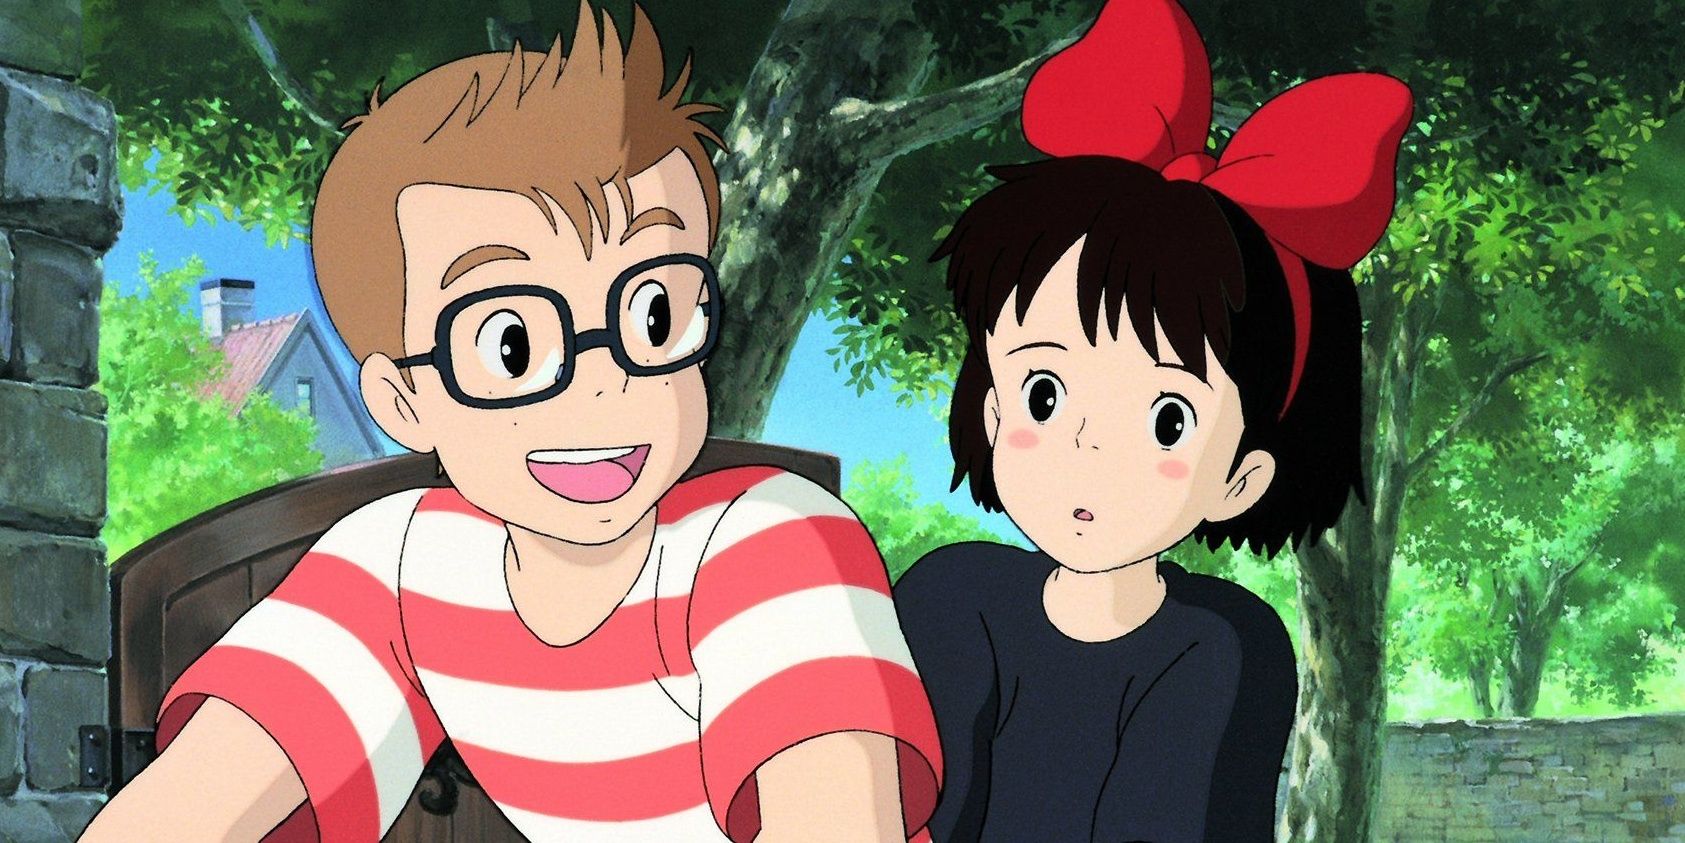 Kiki and Tombo from Kiki's Delivery Service